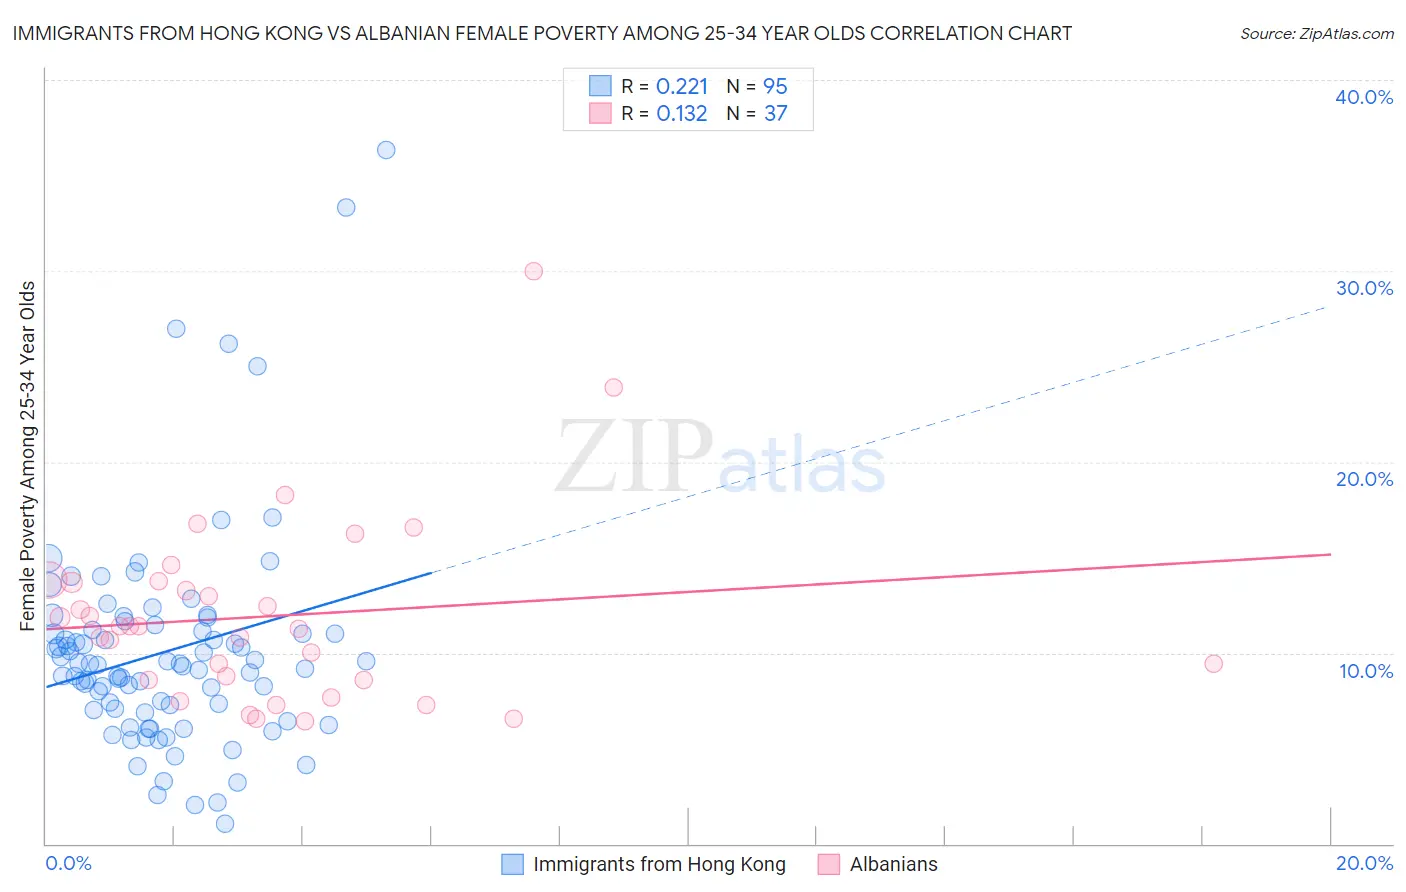 Immigrants from Hong Kong vs Albanian Female Poverty Among 25-34 Year Olds